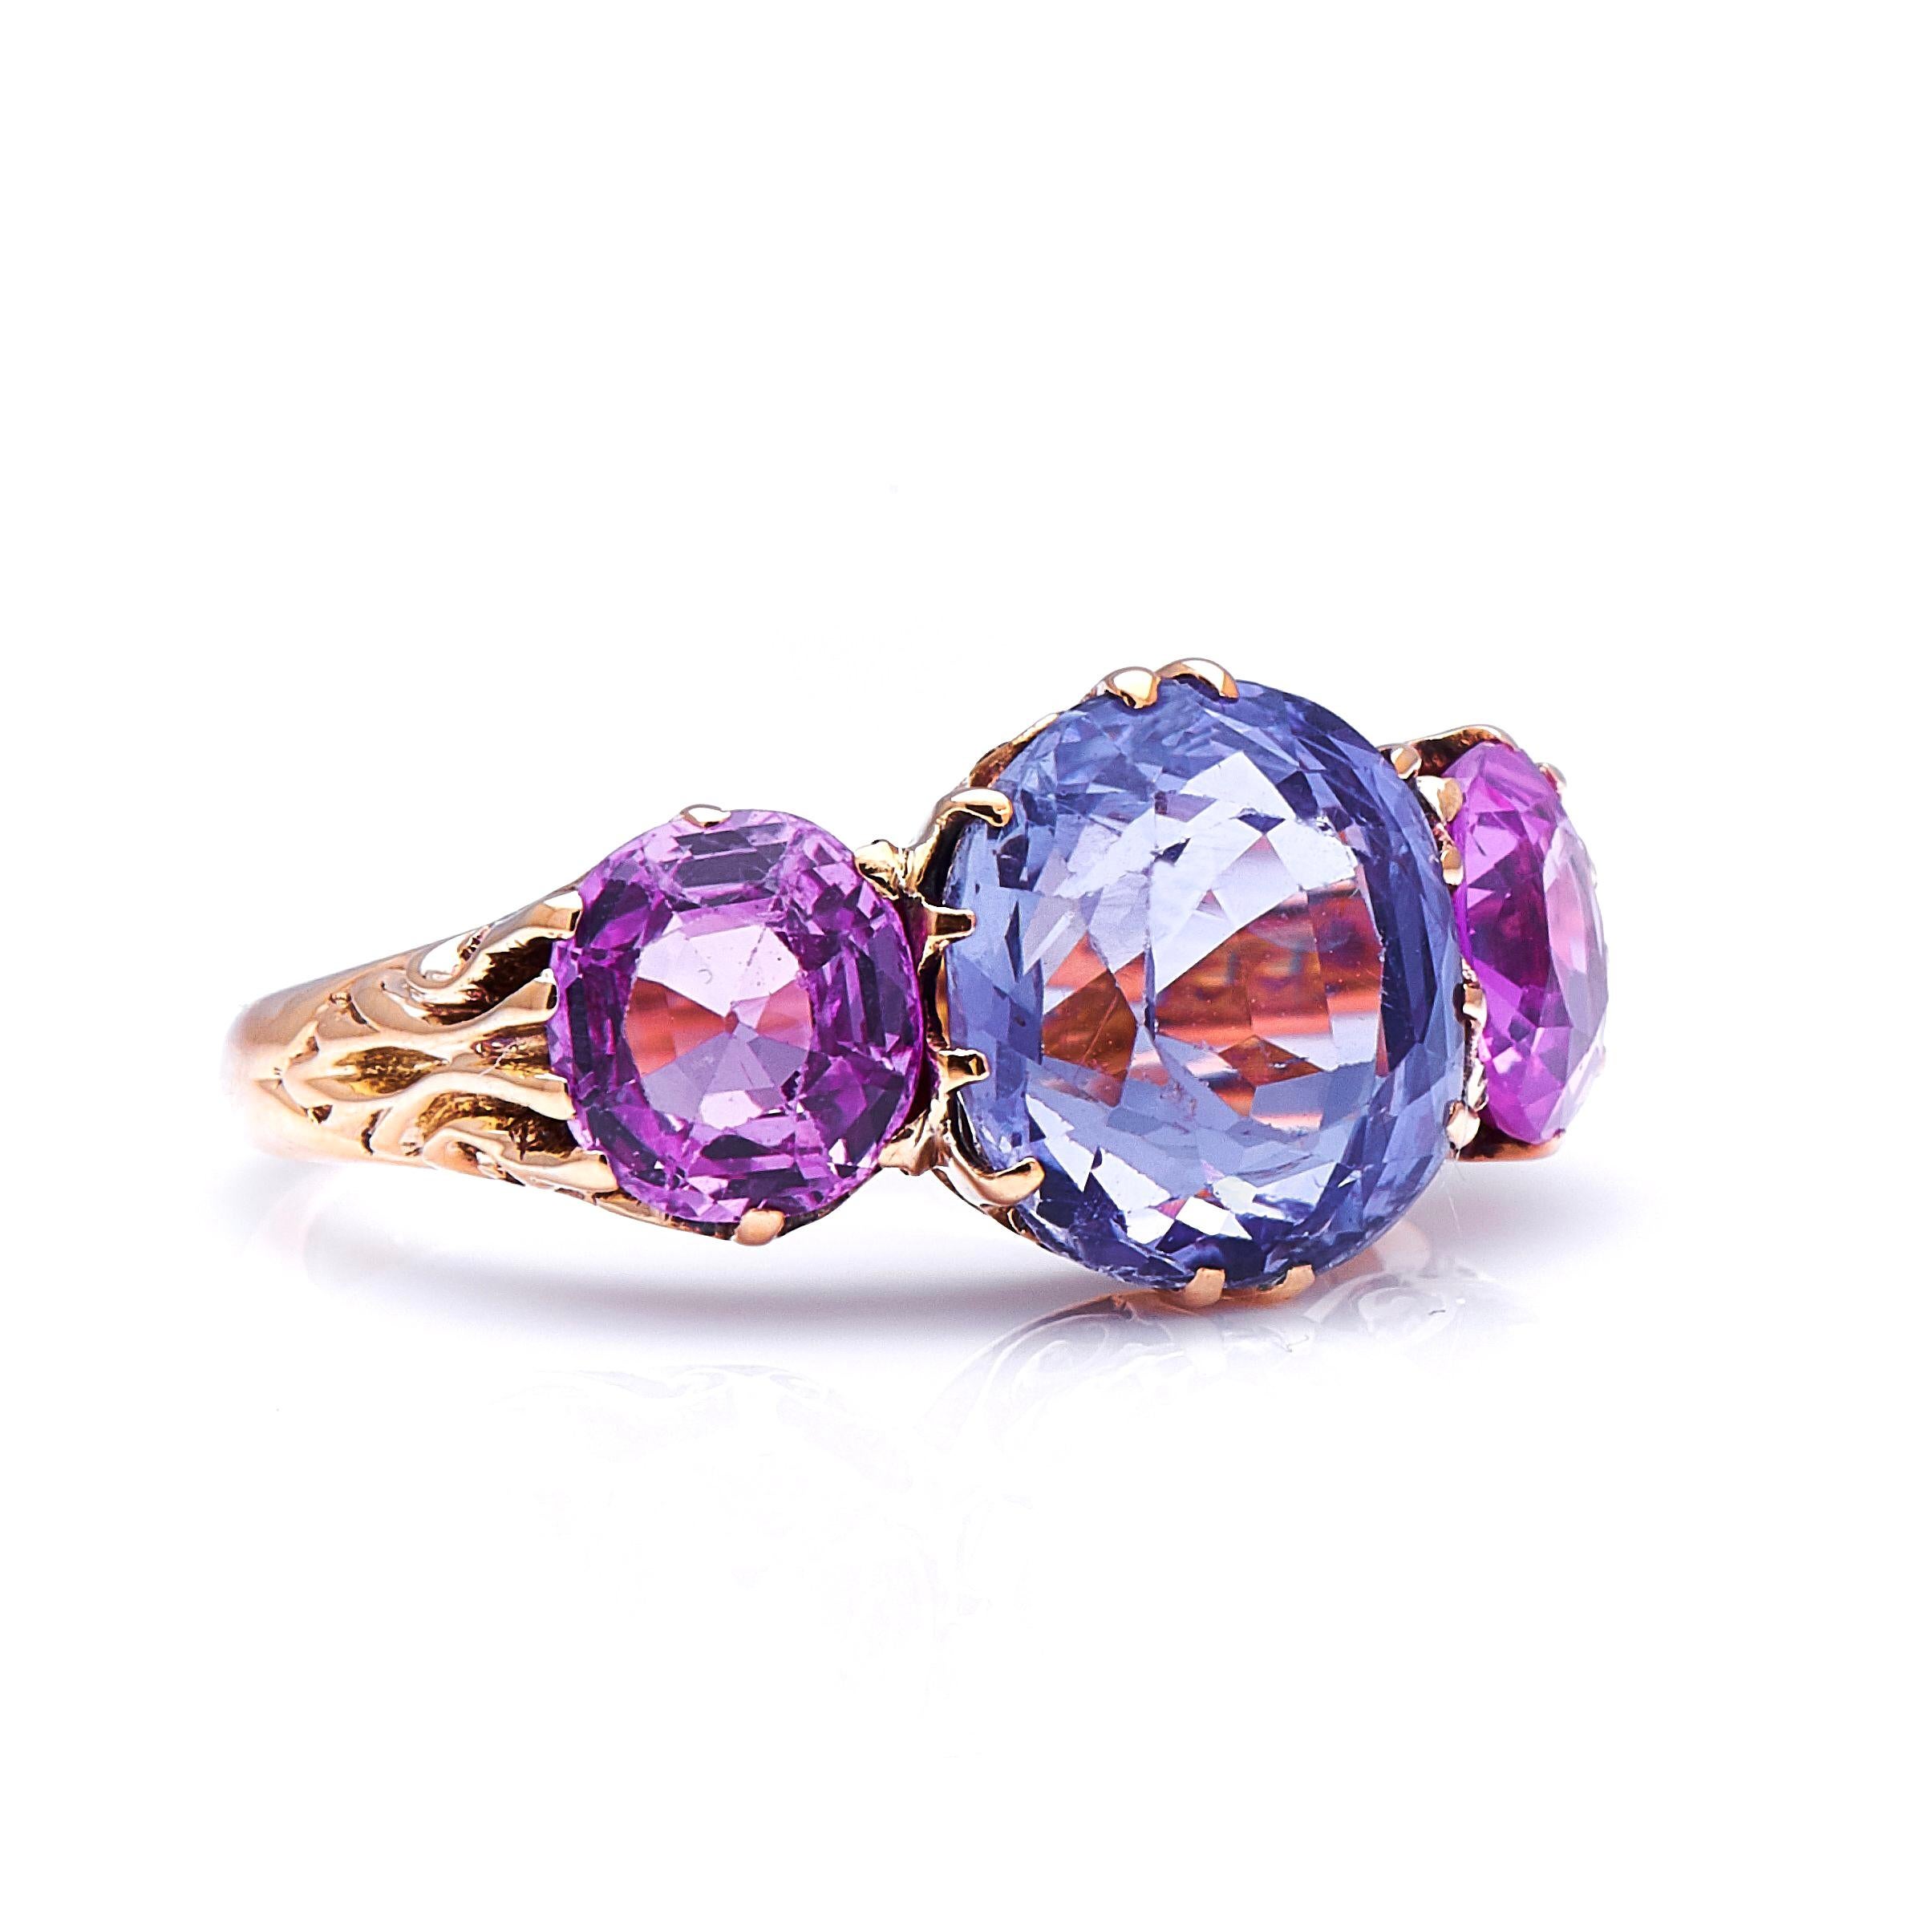 Pink and blue sapphire ring. Sapphires are celebrated for their enormous range of beautiful colours, shown off to great effect by this charming and unusual ring. The central sapphire, weighing approximately 5.1 carats, is a pale, silvery blue in